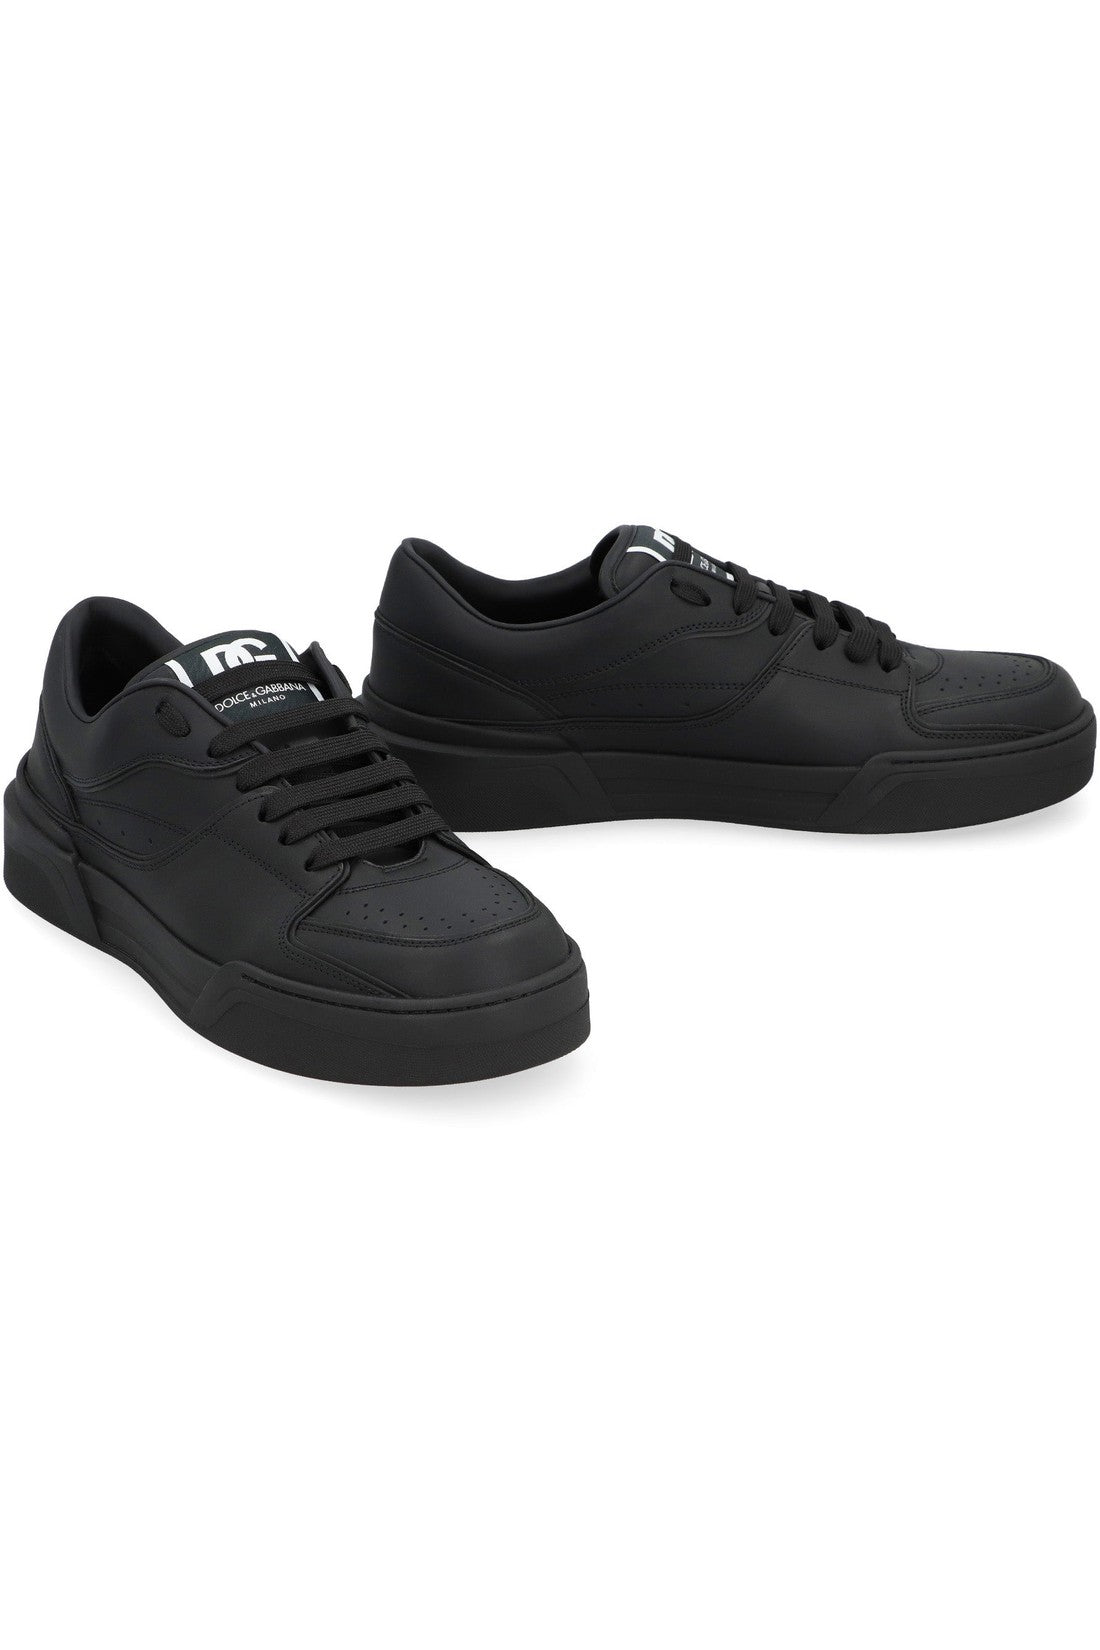 Dolce & Gabbana-OUTLET-SALE-New Roma leather sneakers-ARCHIVIST